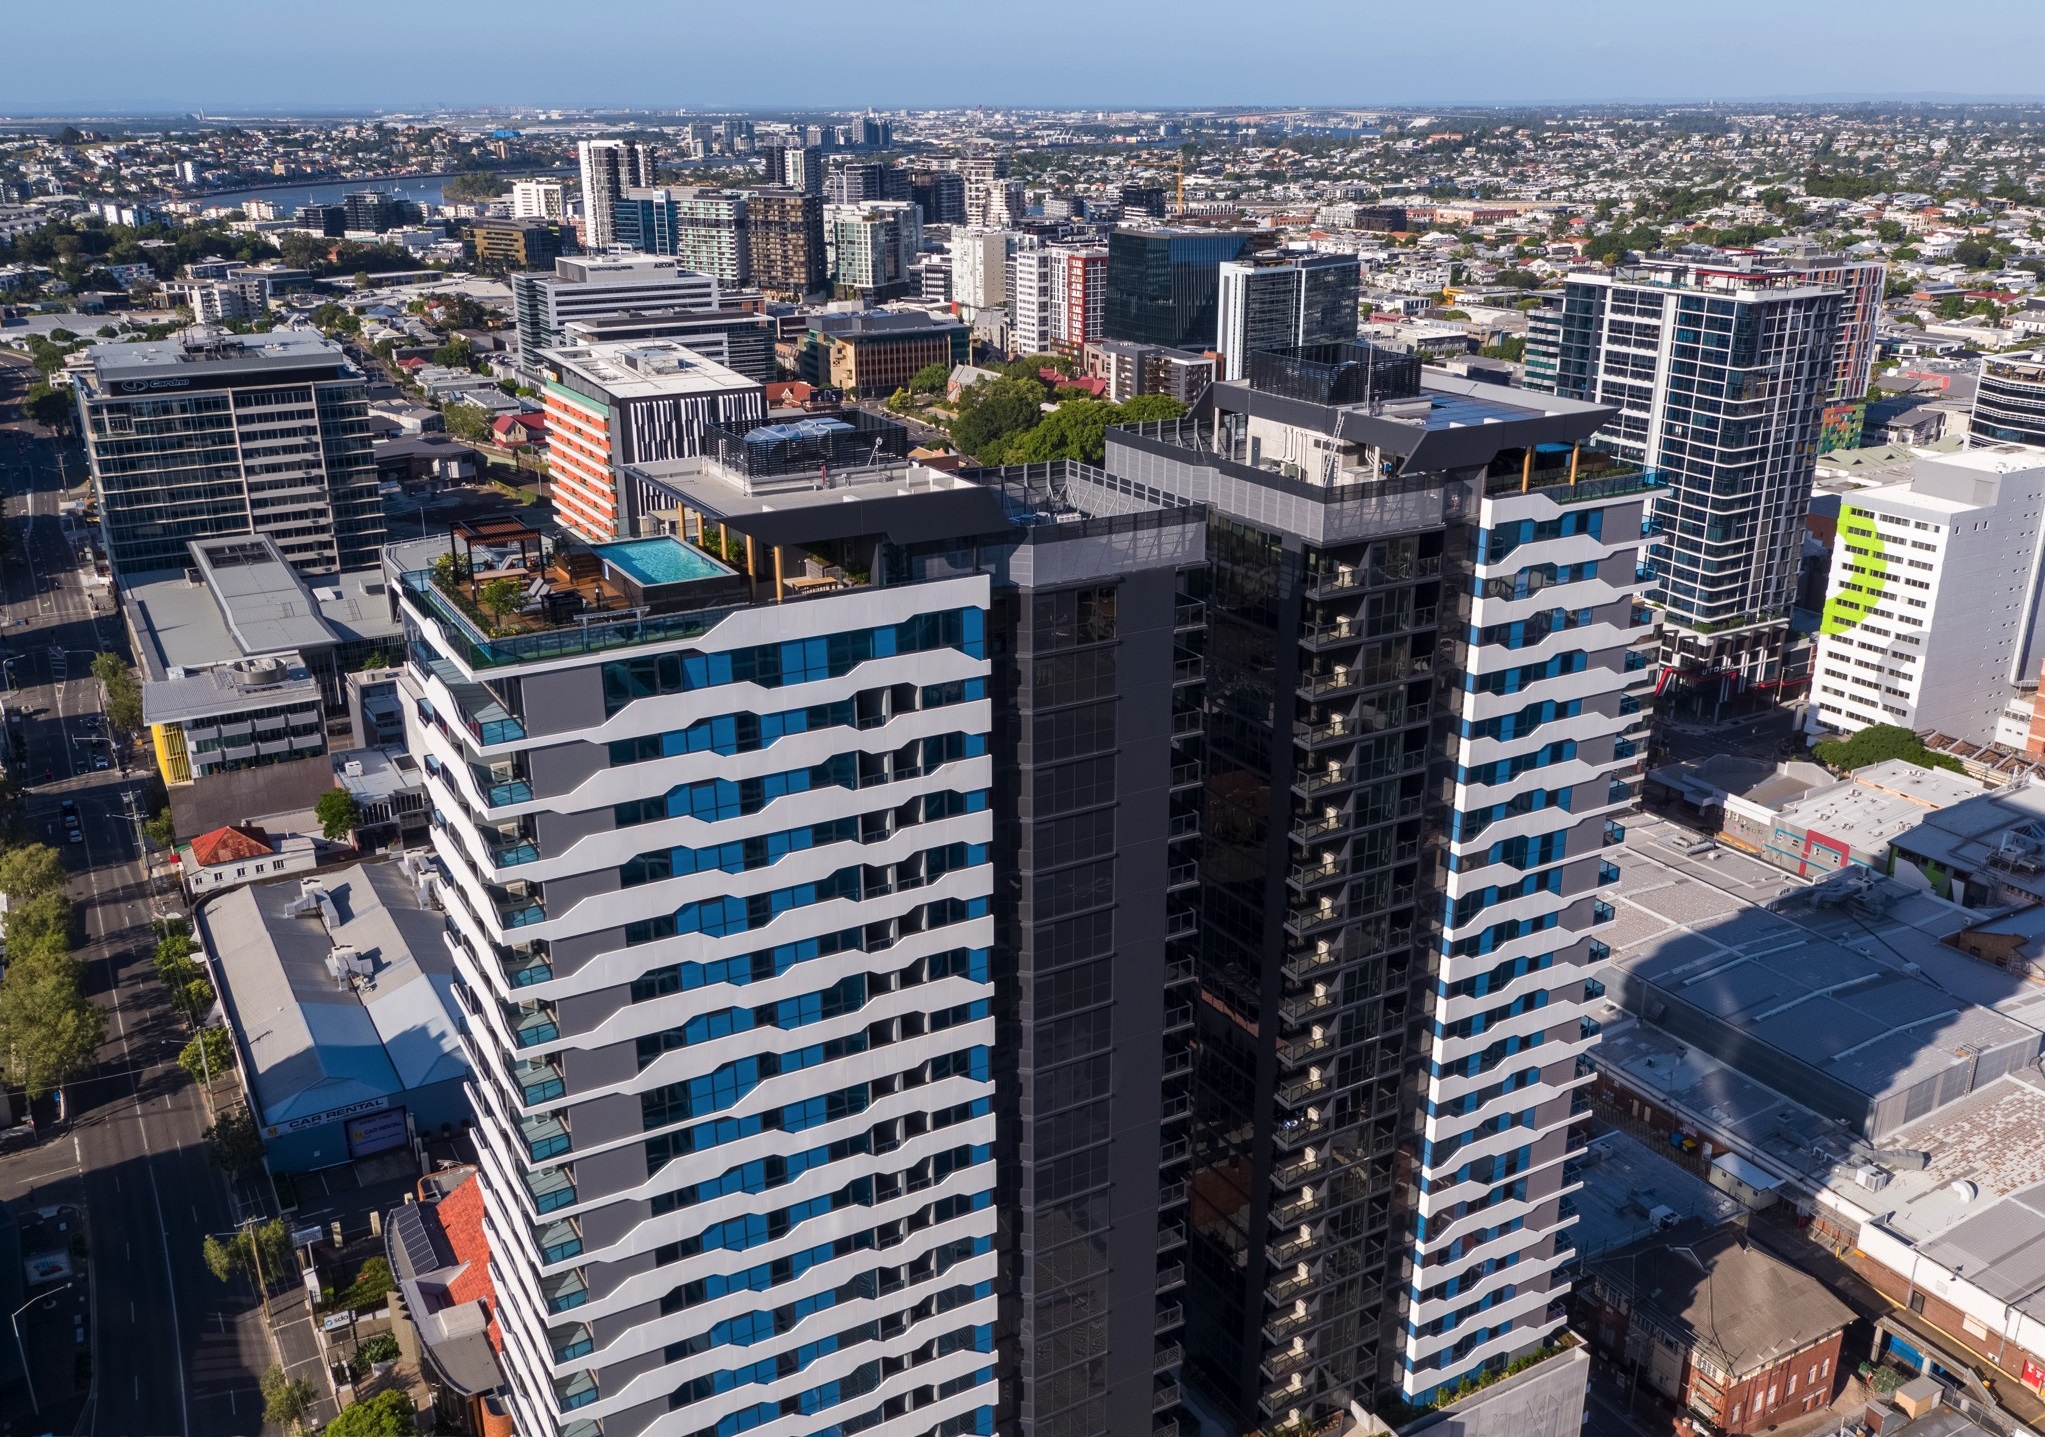 The high life: 10k apartments bound for inner Brisbane in 2023